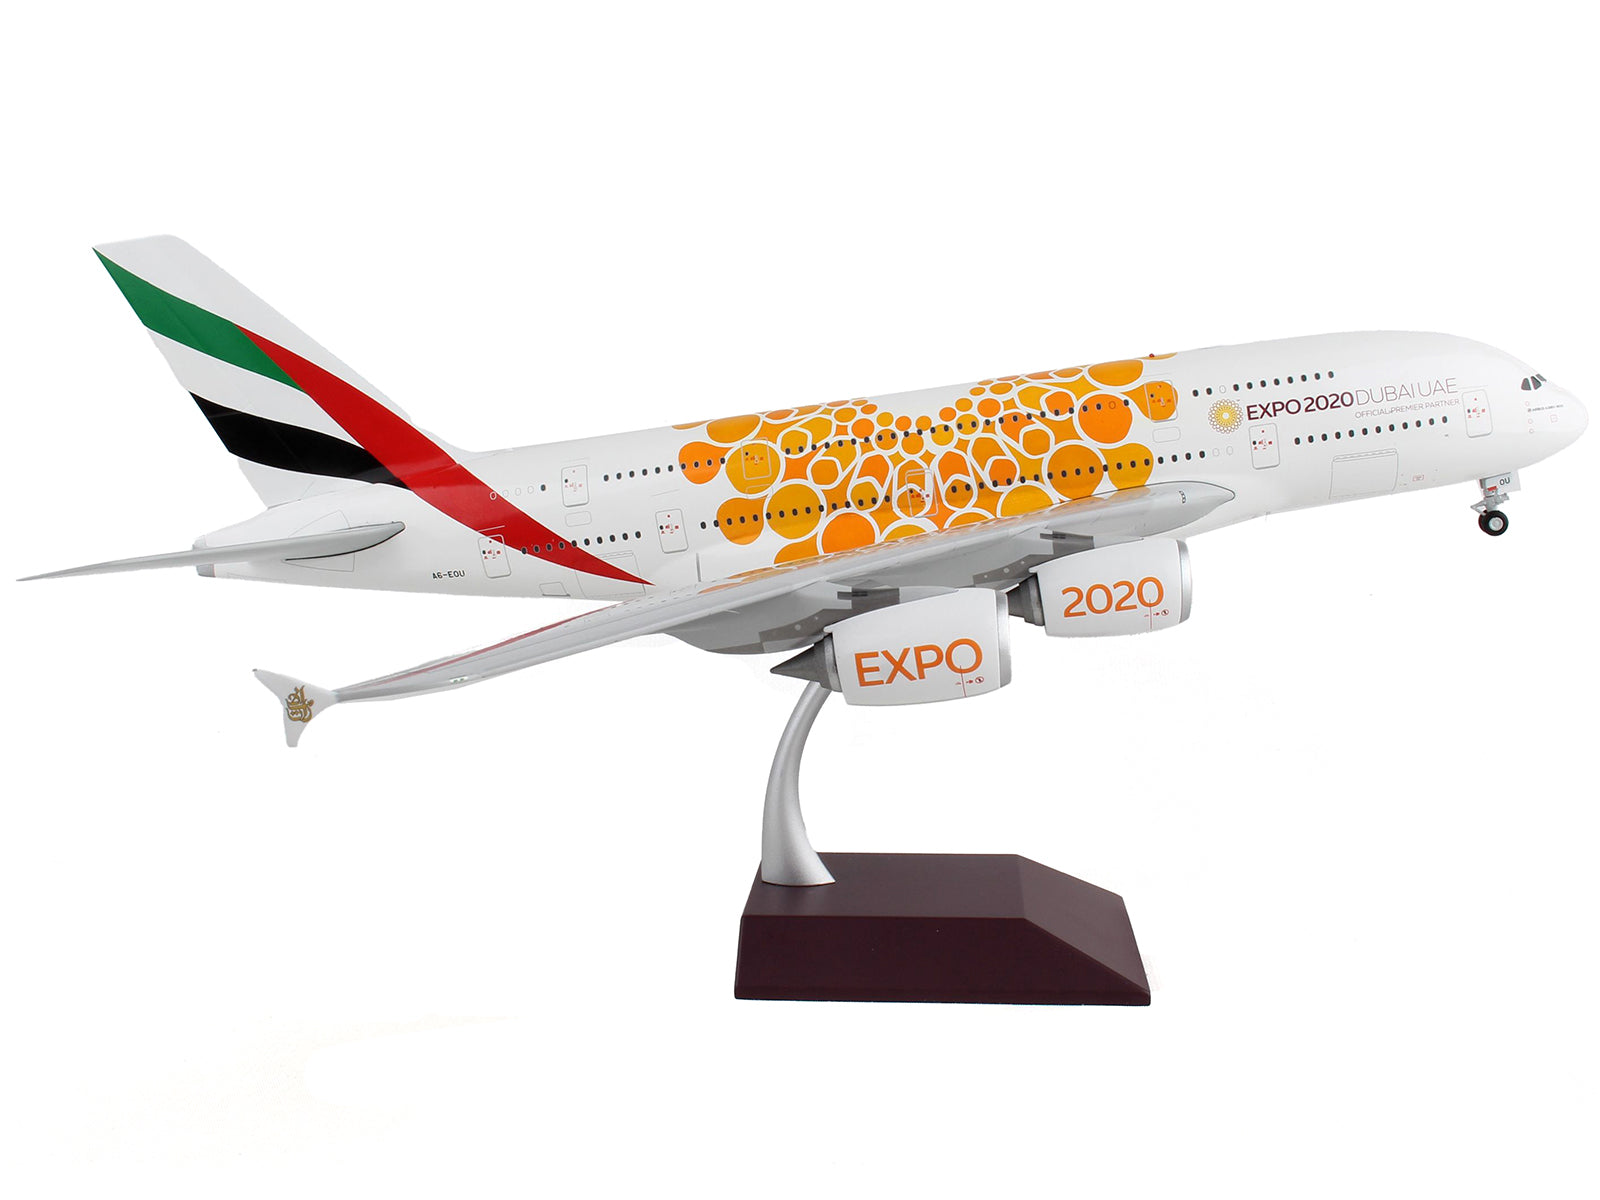 Airbus A380-800 Commercial Aircraft "Emirates Airlines - Dubai Expo 2020" White with Orange Graphics "Gemini 200" Series 1/200 Diecast Model Airplane by GeminiJets